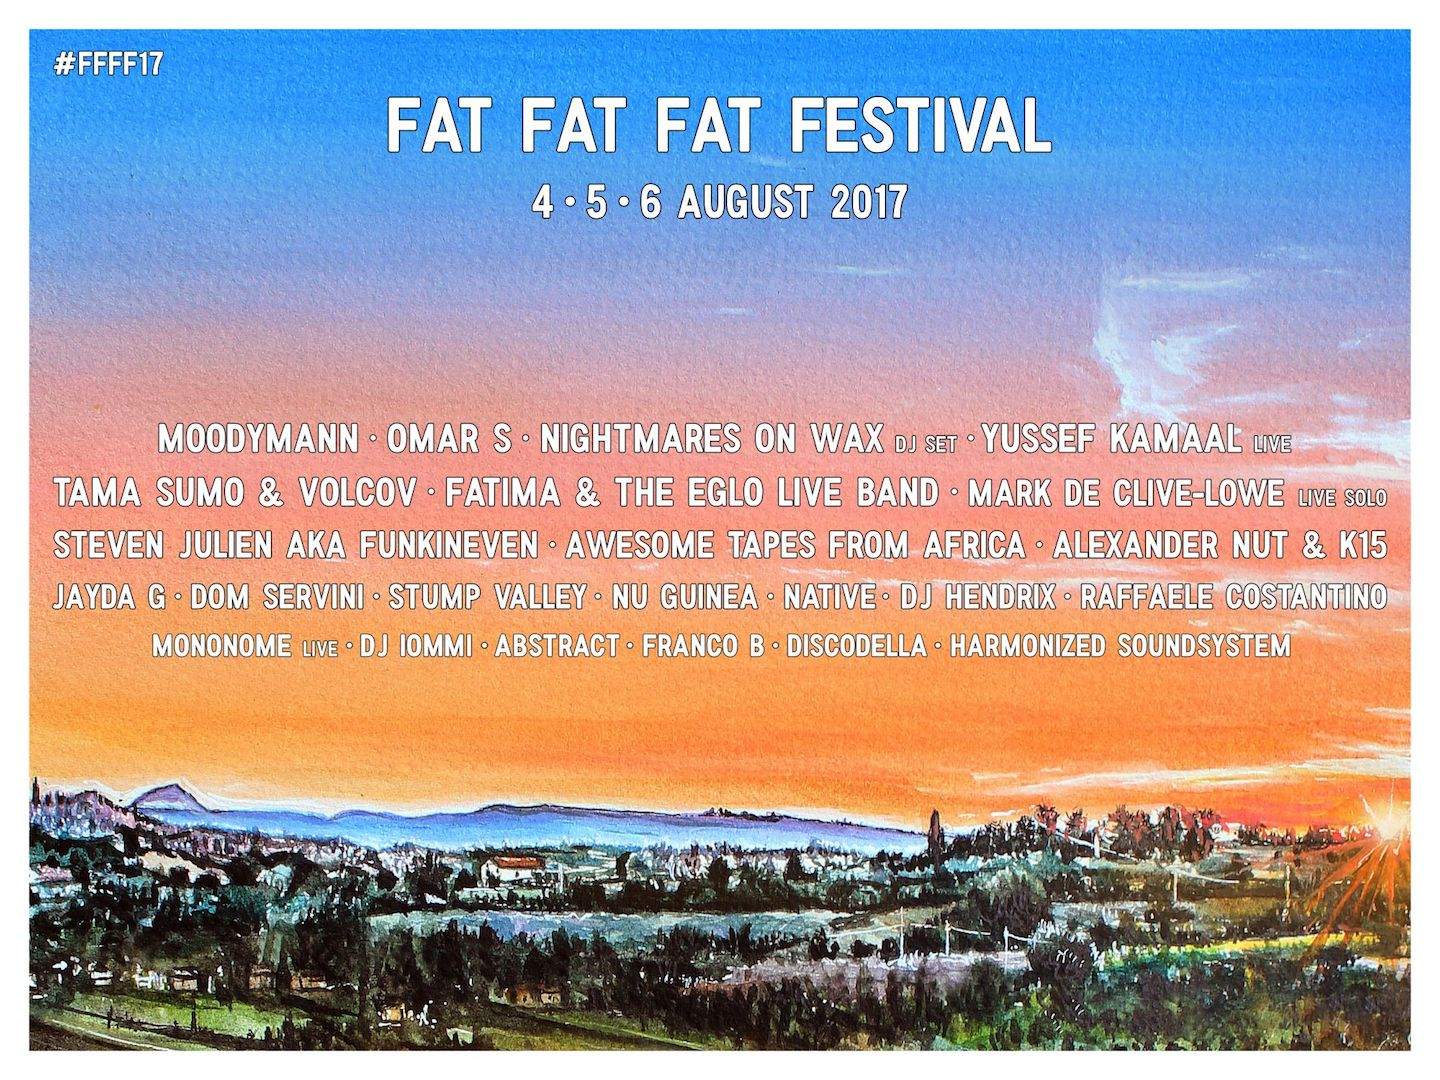 Italy's FAT FAT FAT Festival adds Omar-S, Fatima & The Eglo Live Band for 2017 image